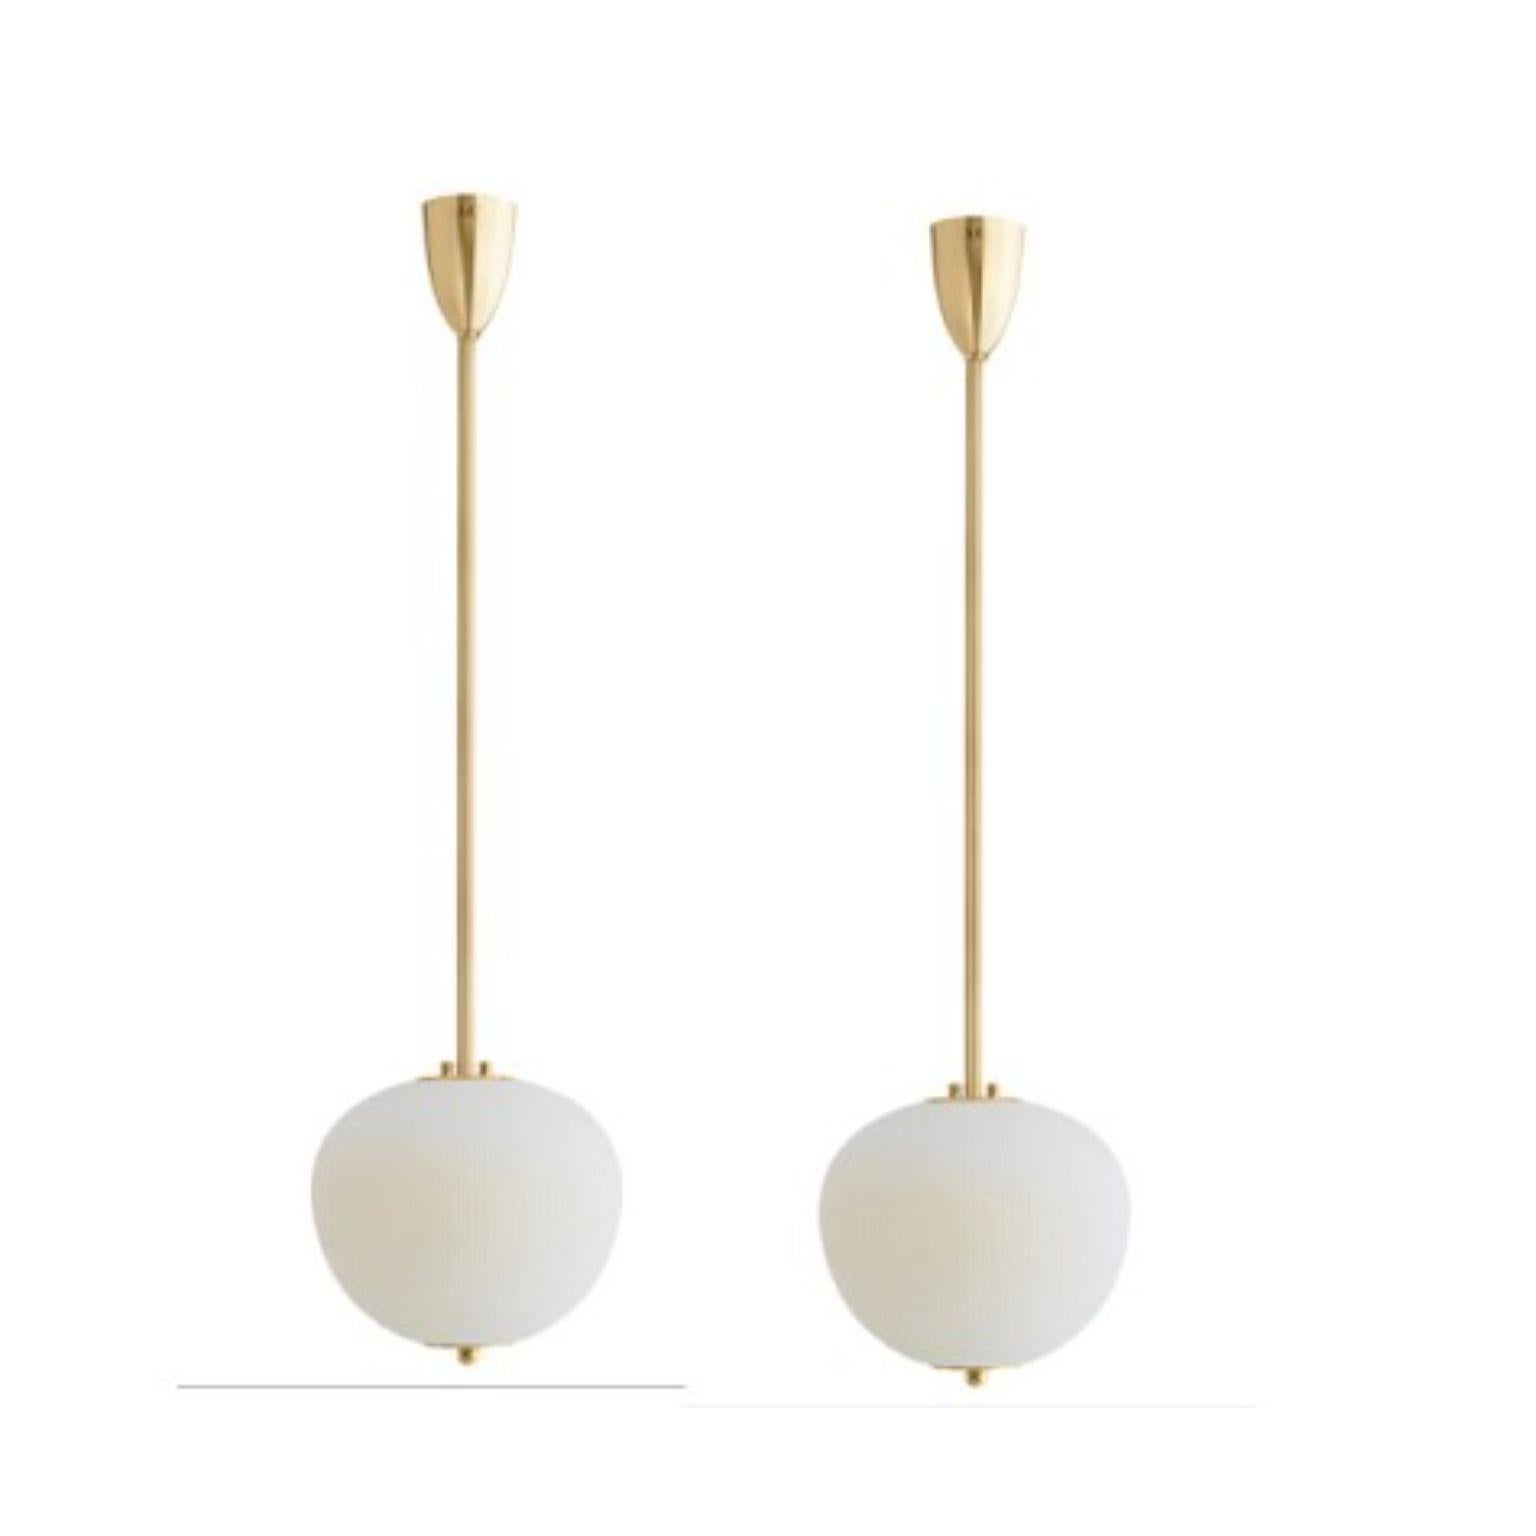 Pendant China 03 by Magic Circus Editions.
Dimensions: H 90 x W 26.2 x D 26.2 cm, also available in H 110, 130, 150, 175, 190.
Materials: brass, mouth blown glass sculpted with a diamond saw.
Colour: ivory

Available finishes: brass,